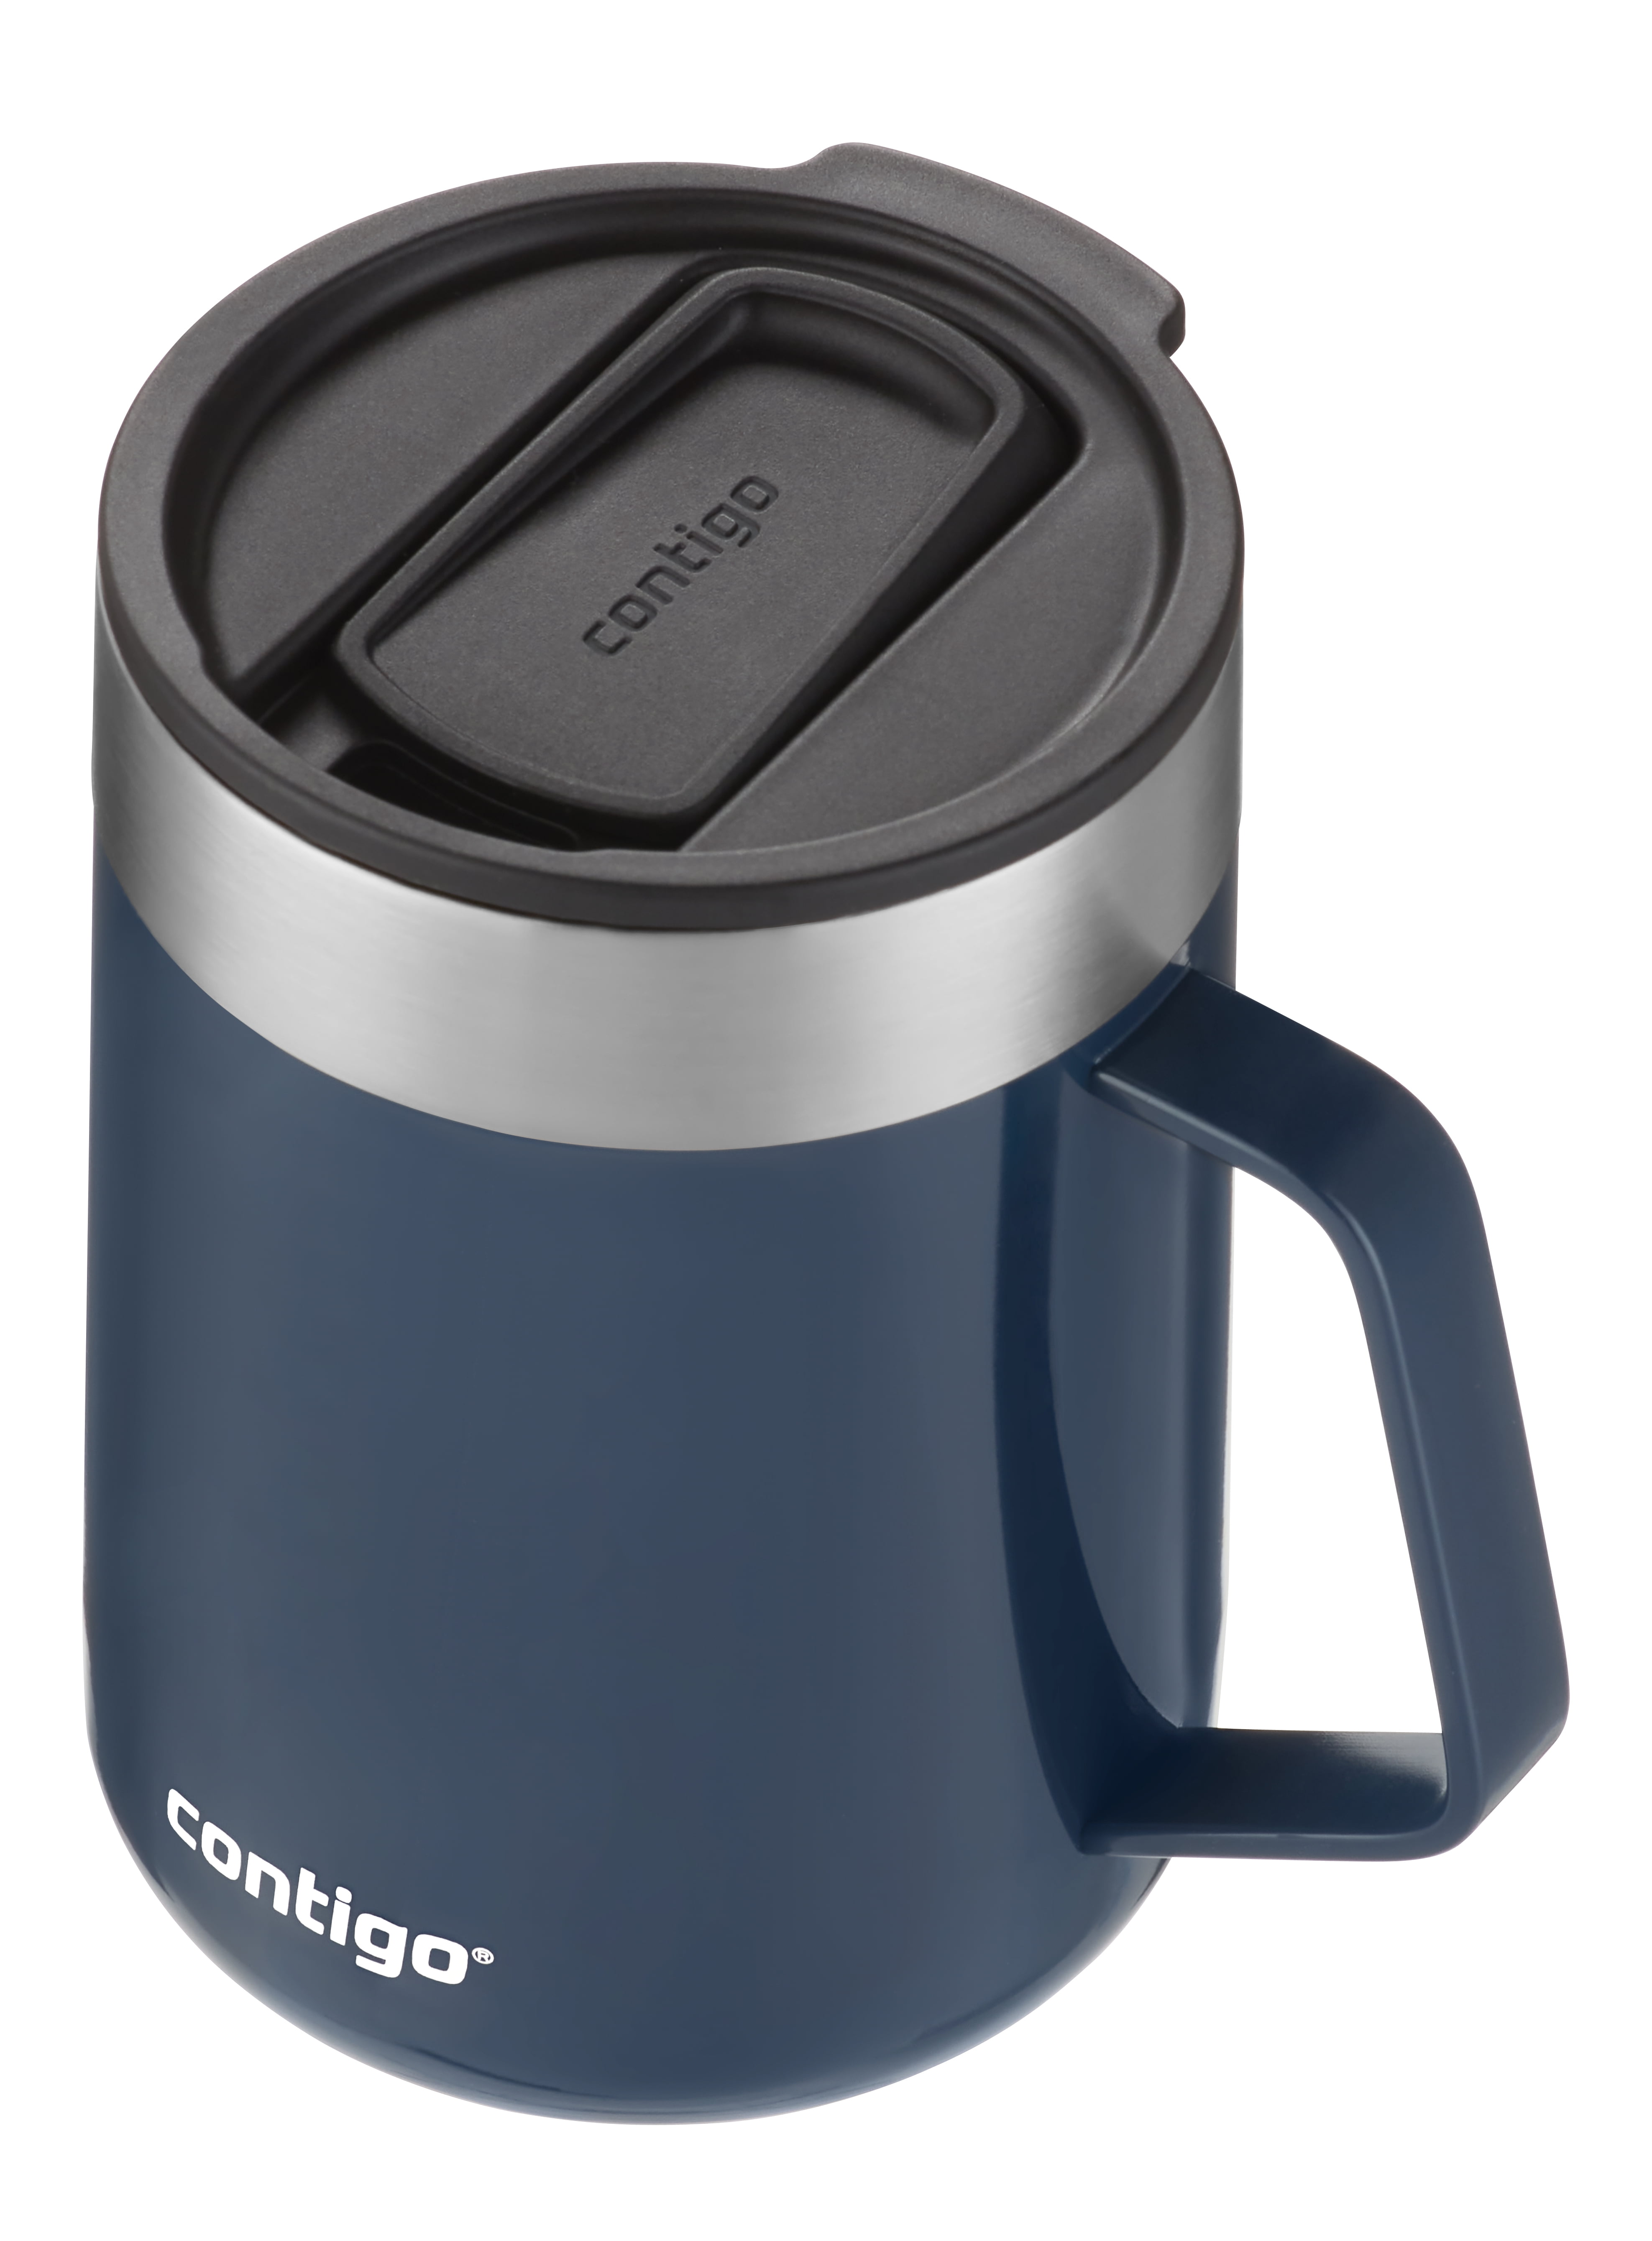  Contigo West Loop Spill-Proof Travel Mug, 14 Oz, 2 pk. Vervain  and Stainless Steel. : Home & Kitchen